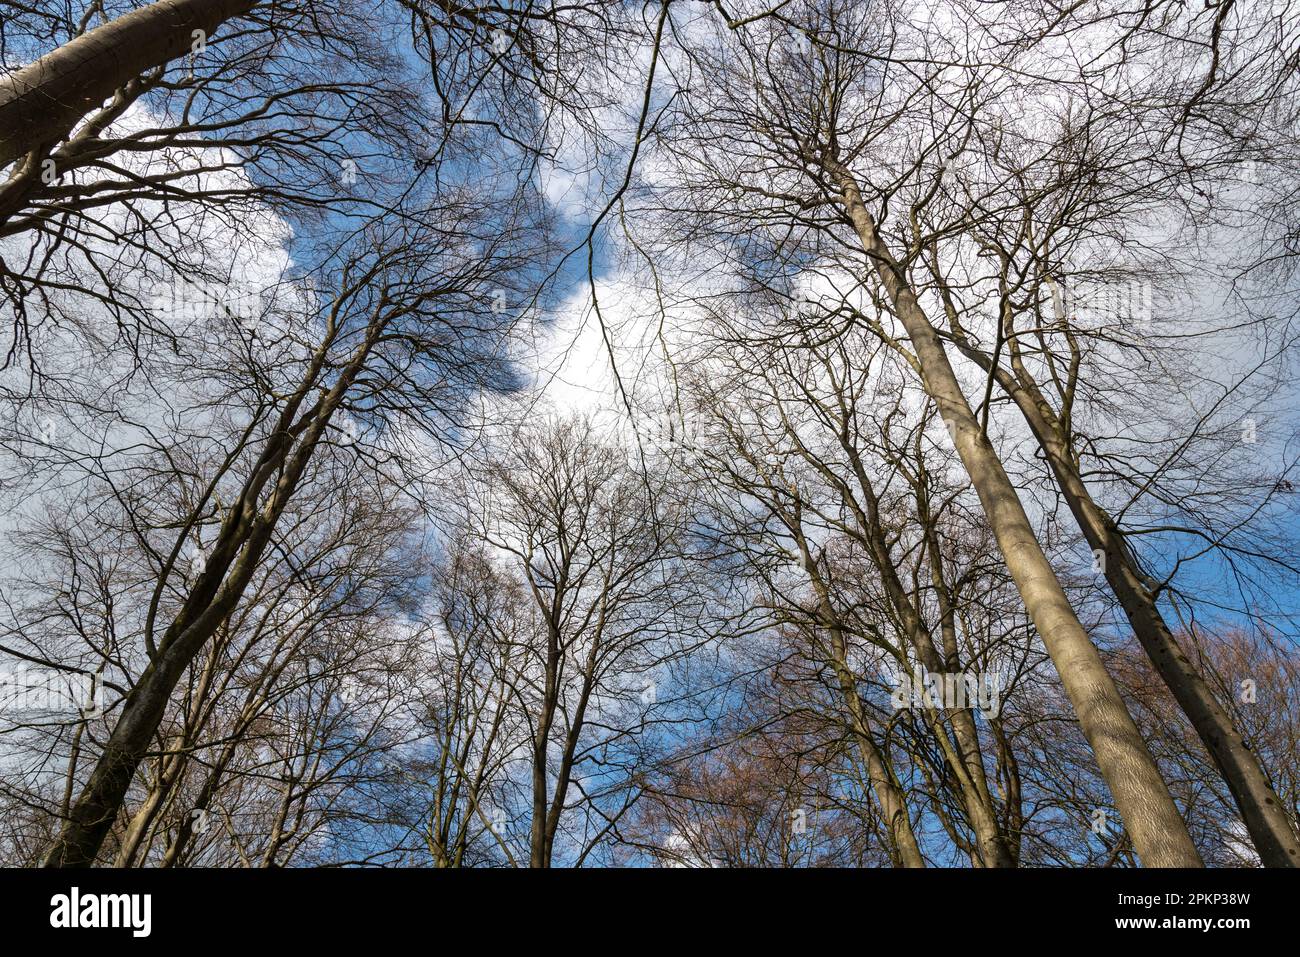 Looking up at a tree canopy with blue sky and fluffy white clouds during spring. Stock Photo